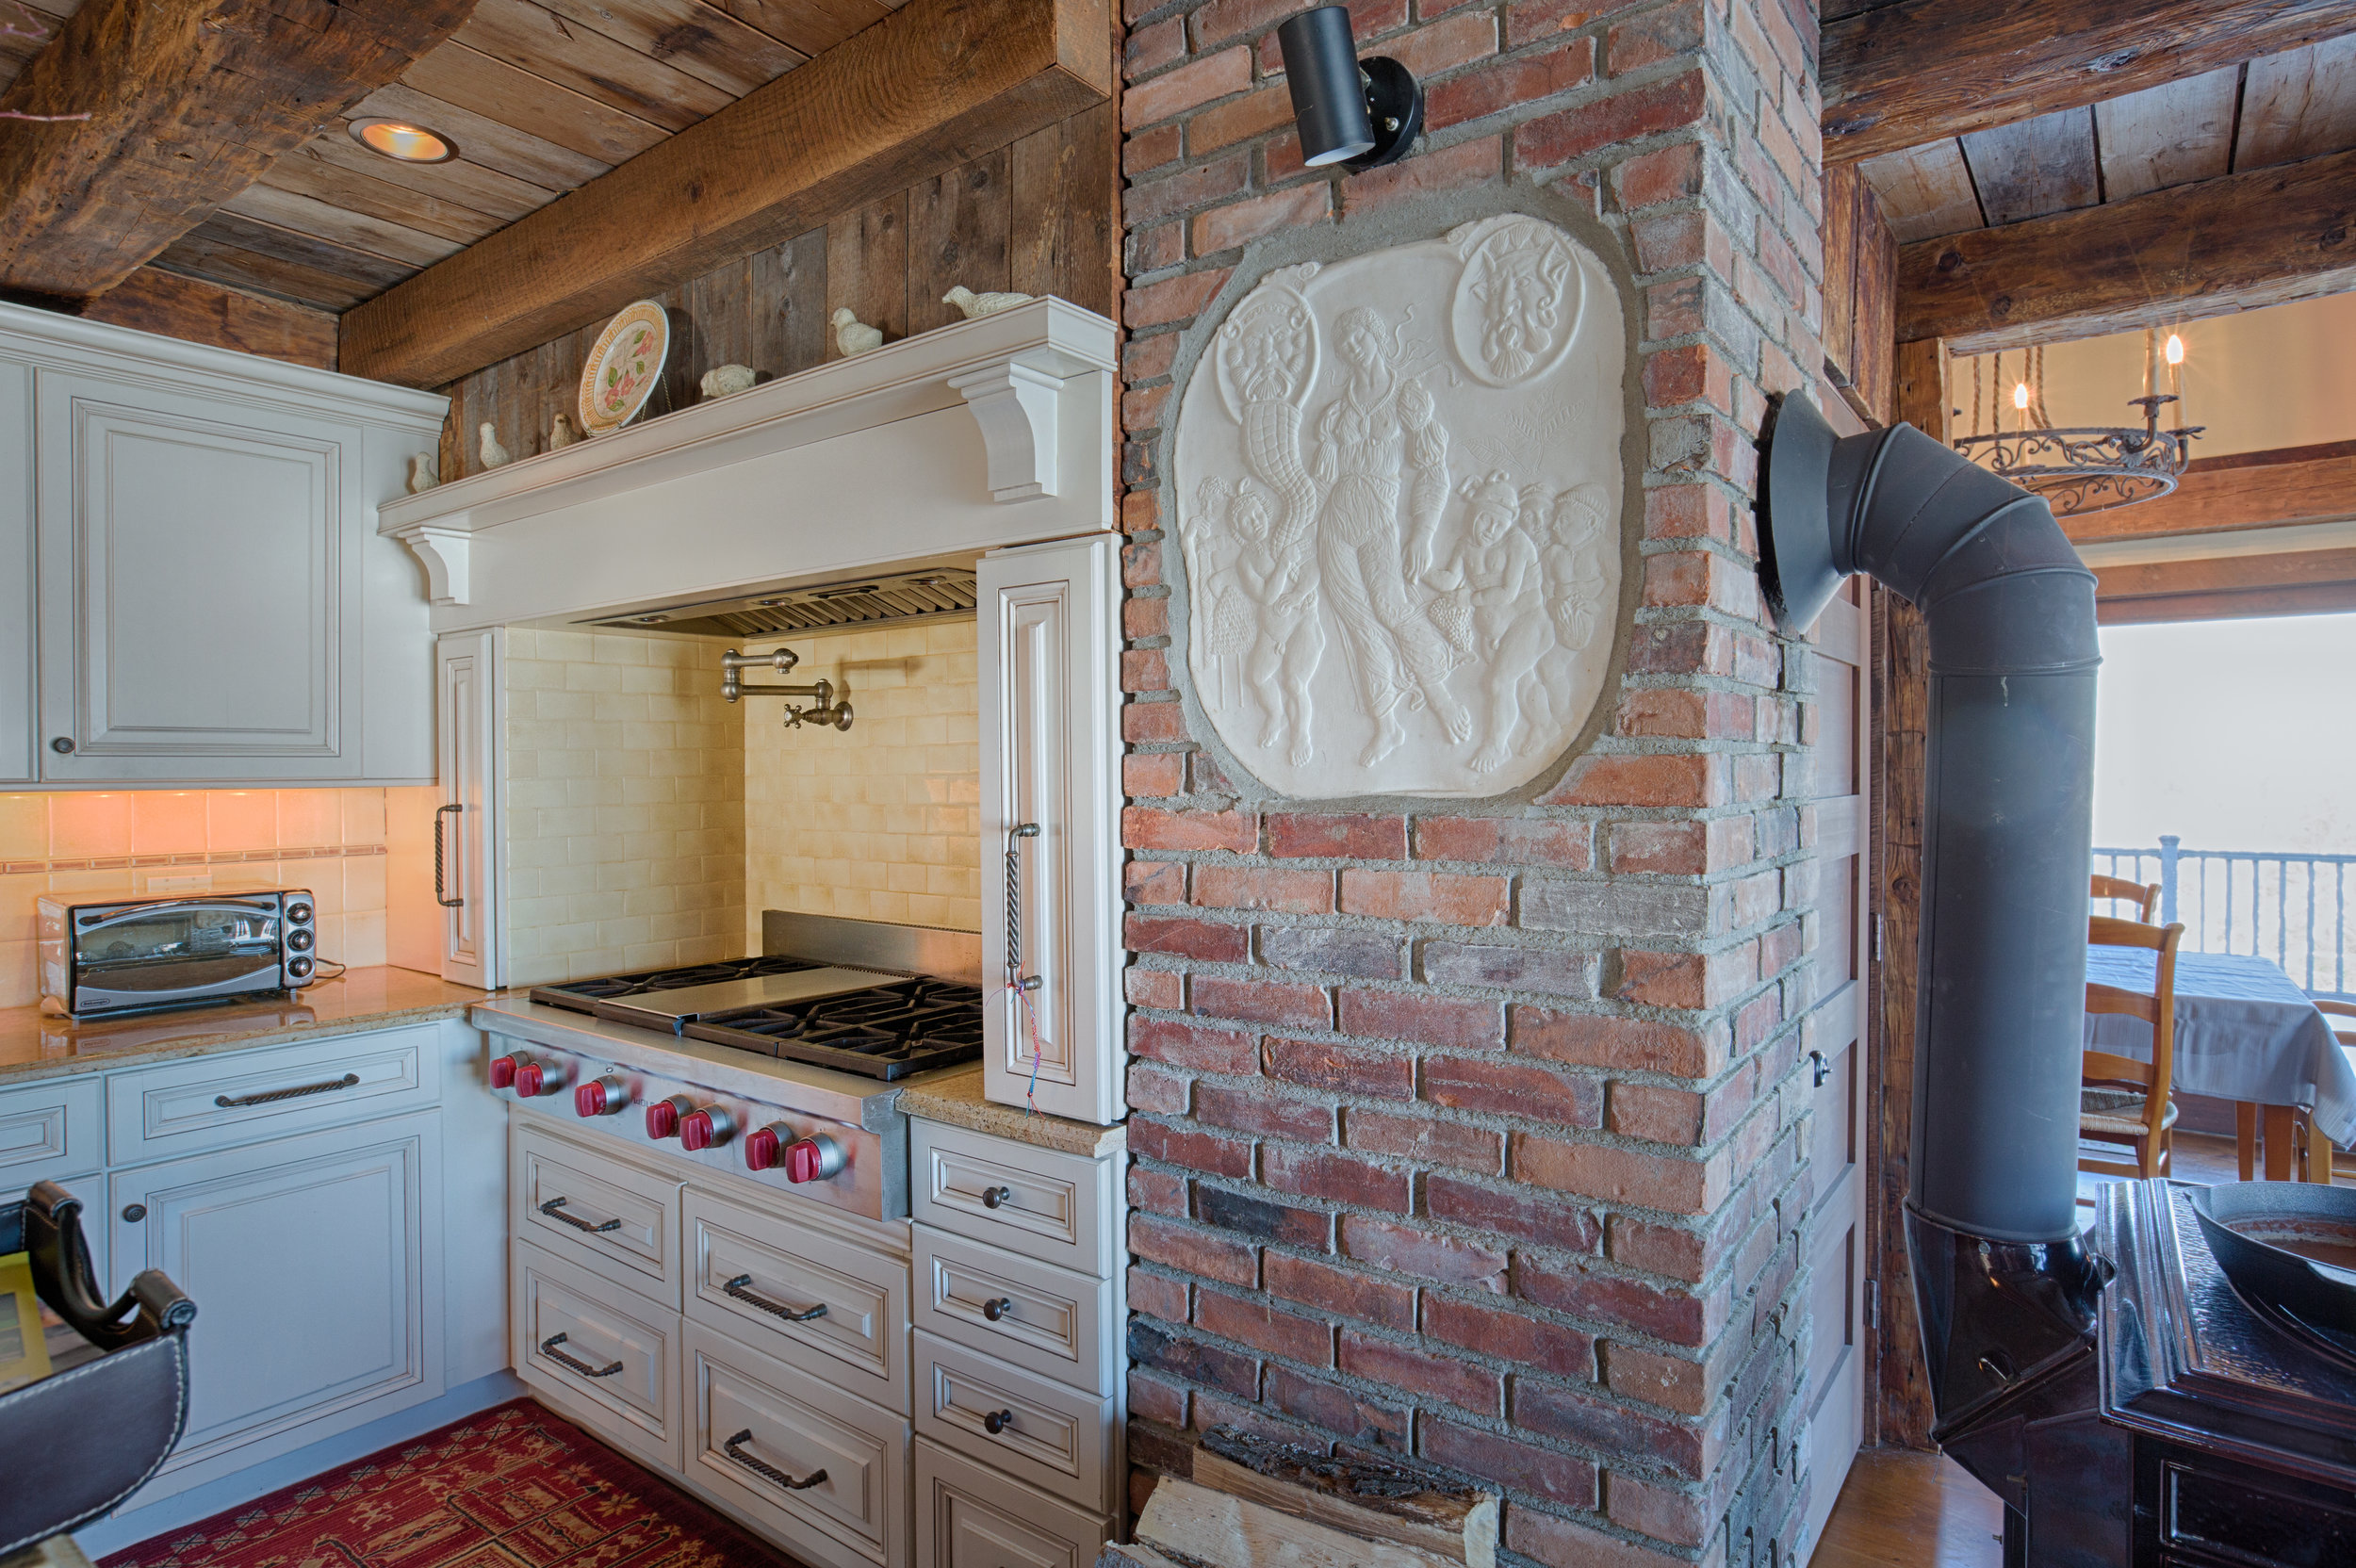  Kitchen stove top nook.  Brick wall surrounds the high-end cook top with drawers underneath.  A built in vent is above the cook top and a pot filler faucet is on the back wall. 